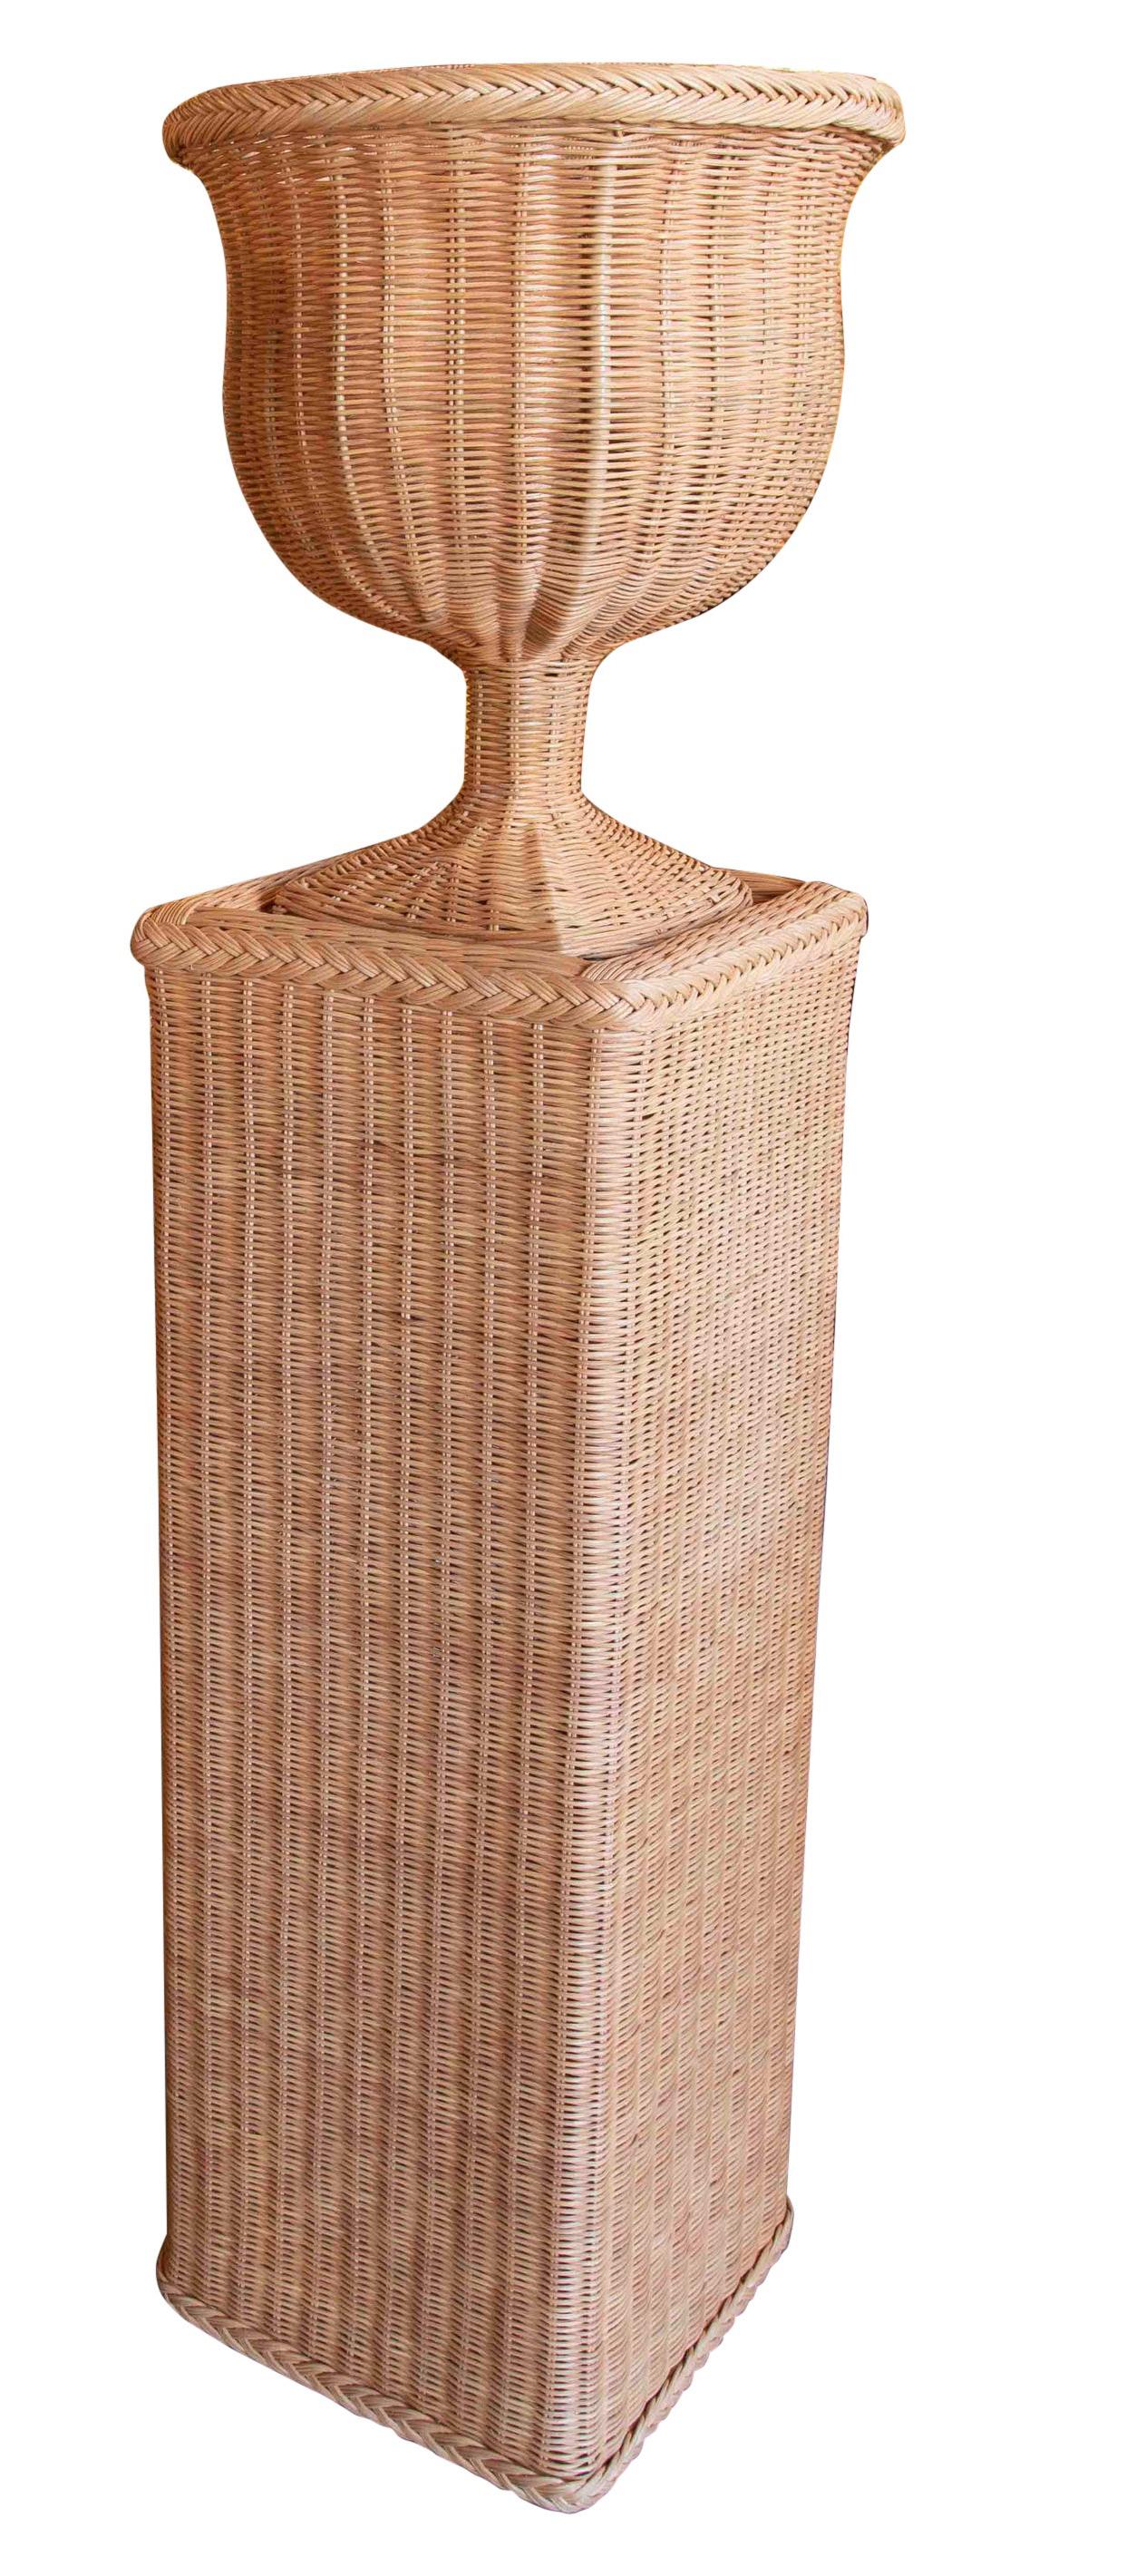 European Handmade Wicker Urns with Rectangular Base and Iron Structure For Sale